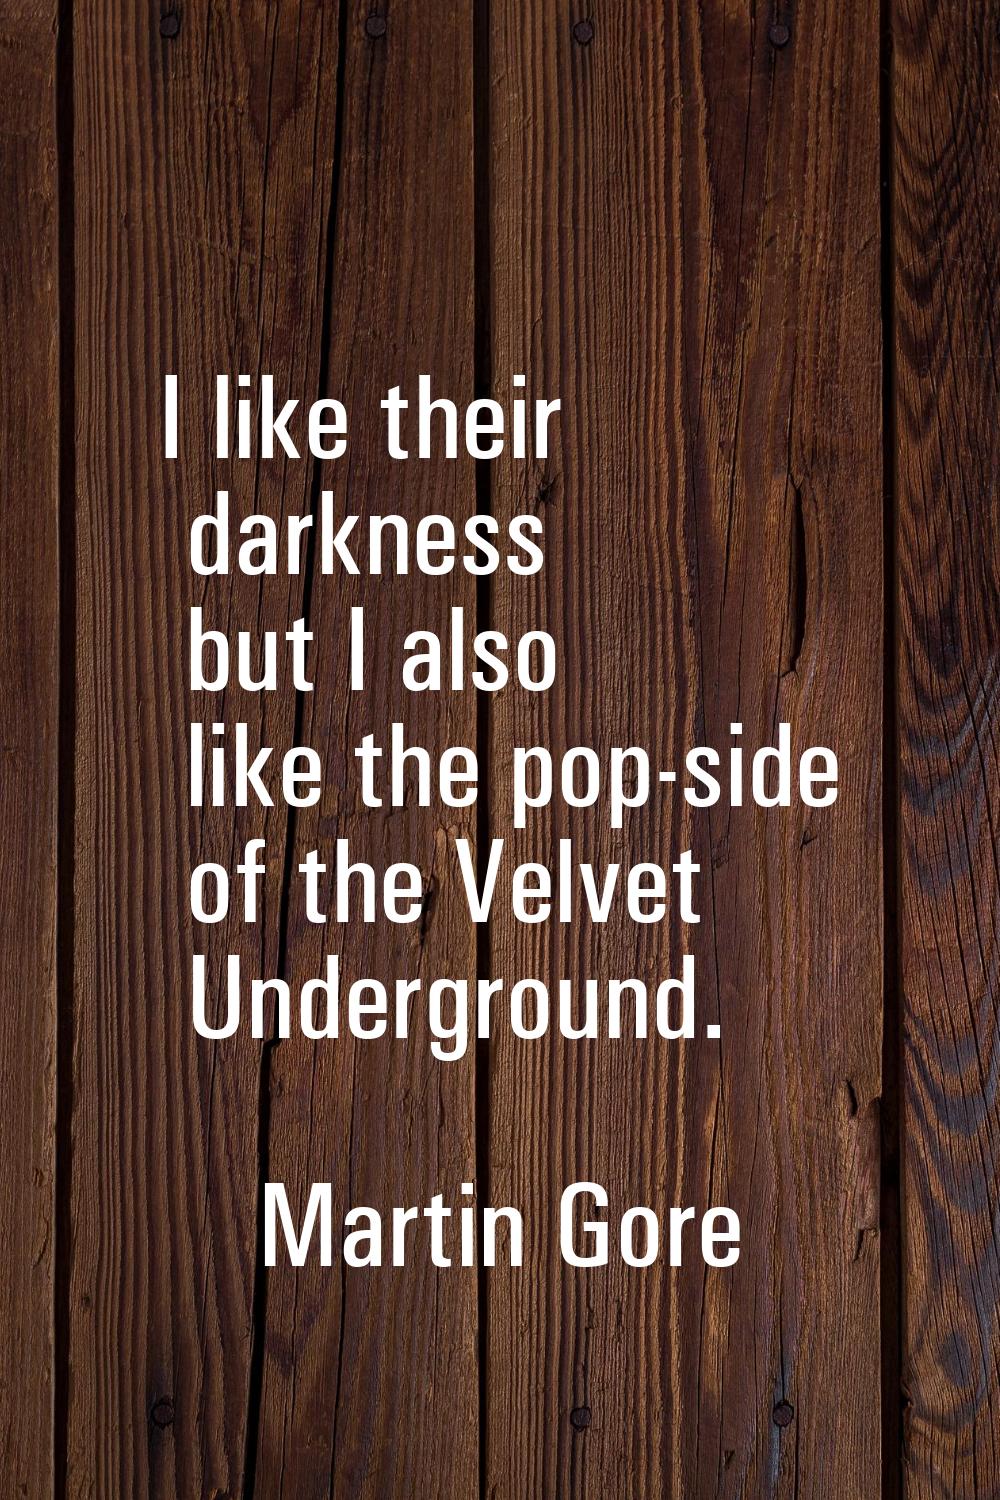 I like their darkness but I also like the pop-side of the Velvet Underground.